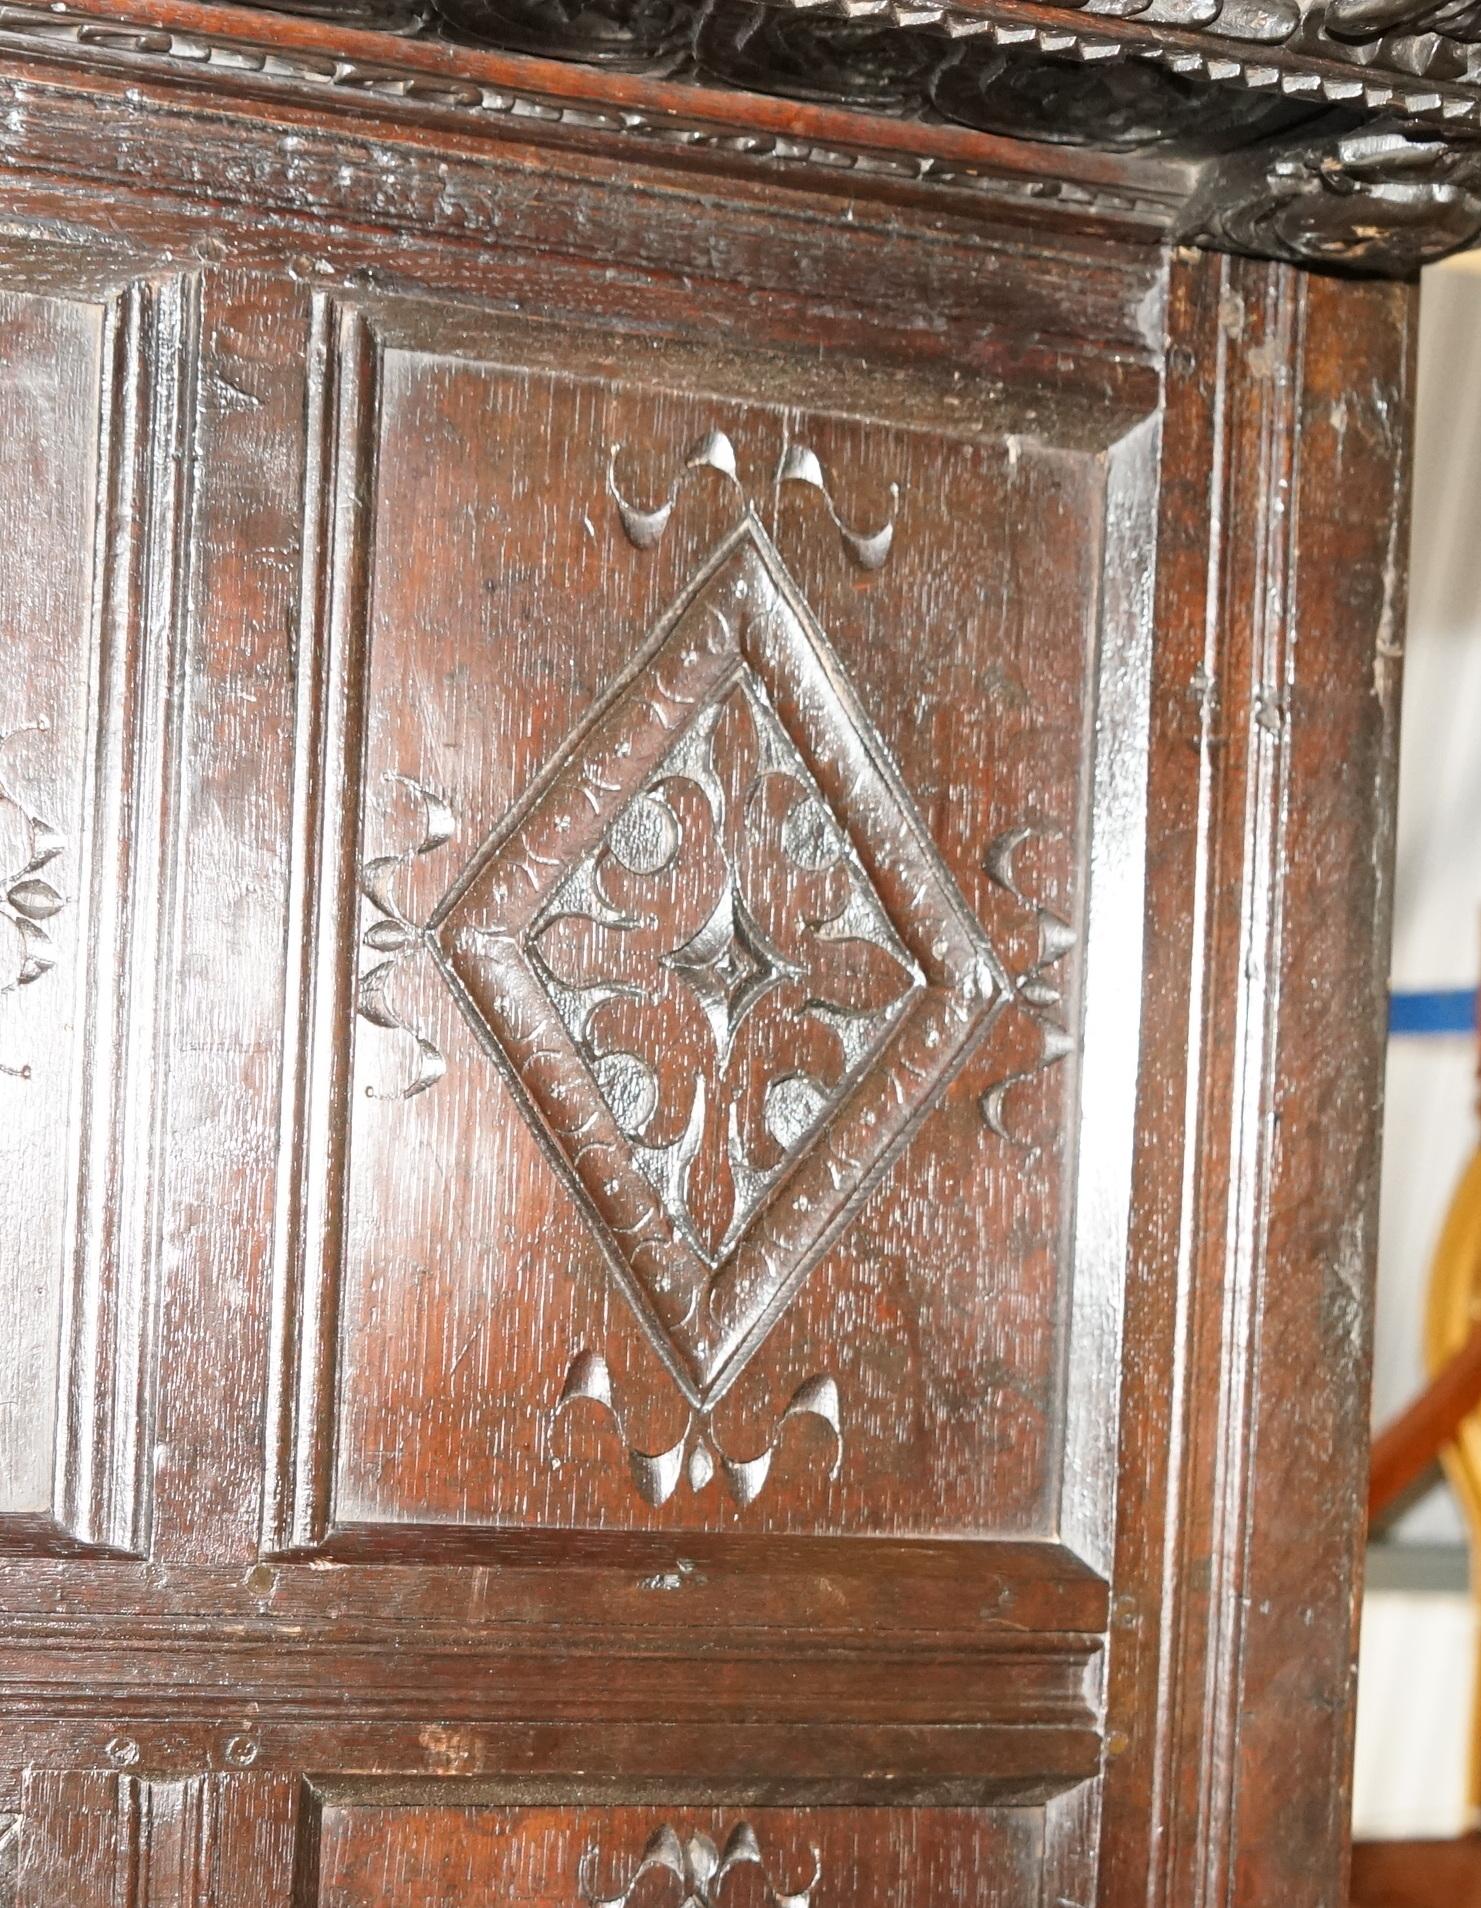 17TH CENTURY JACOBEAN WILLIAM III CIRCA 1650 ENGLiSH OAK TESTER FOUR POSTER BED For Sale 4